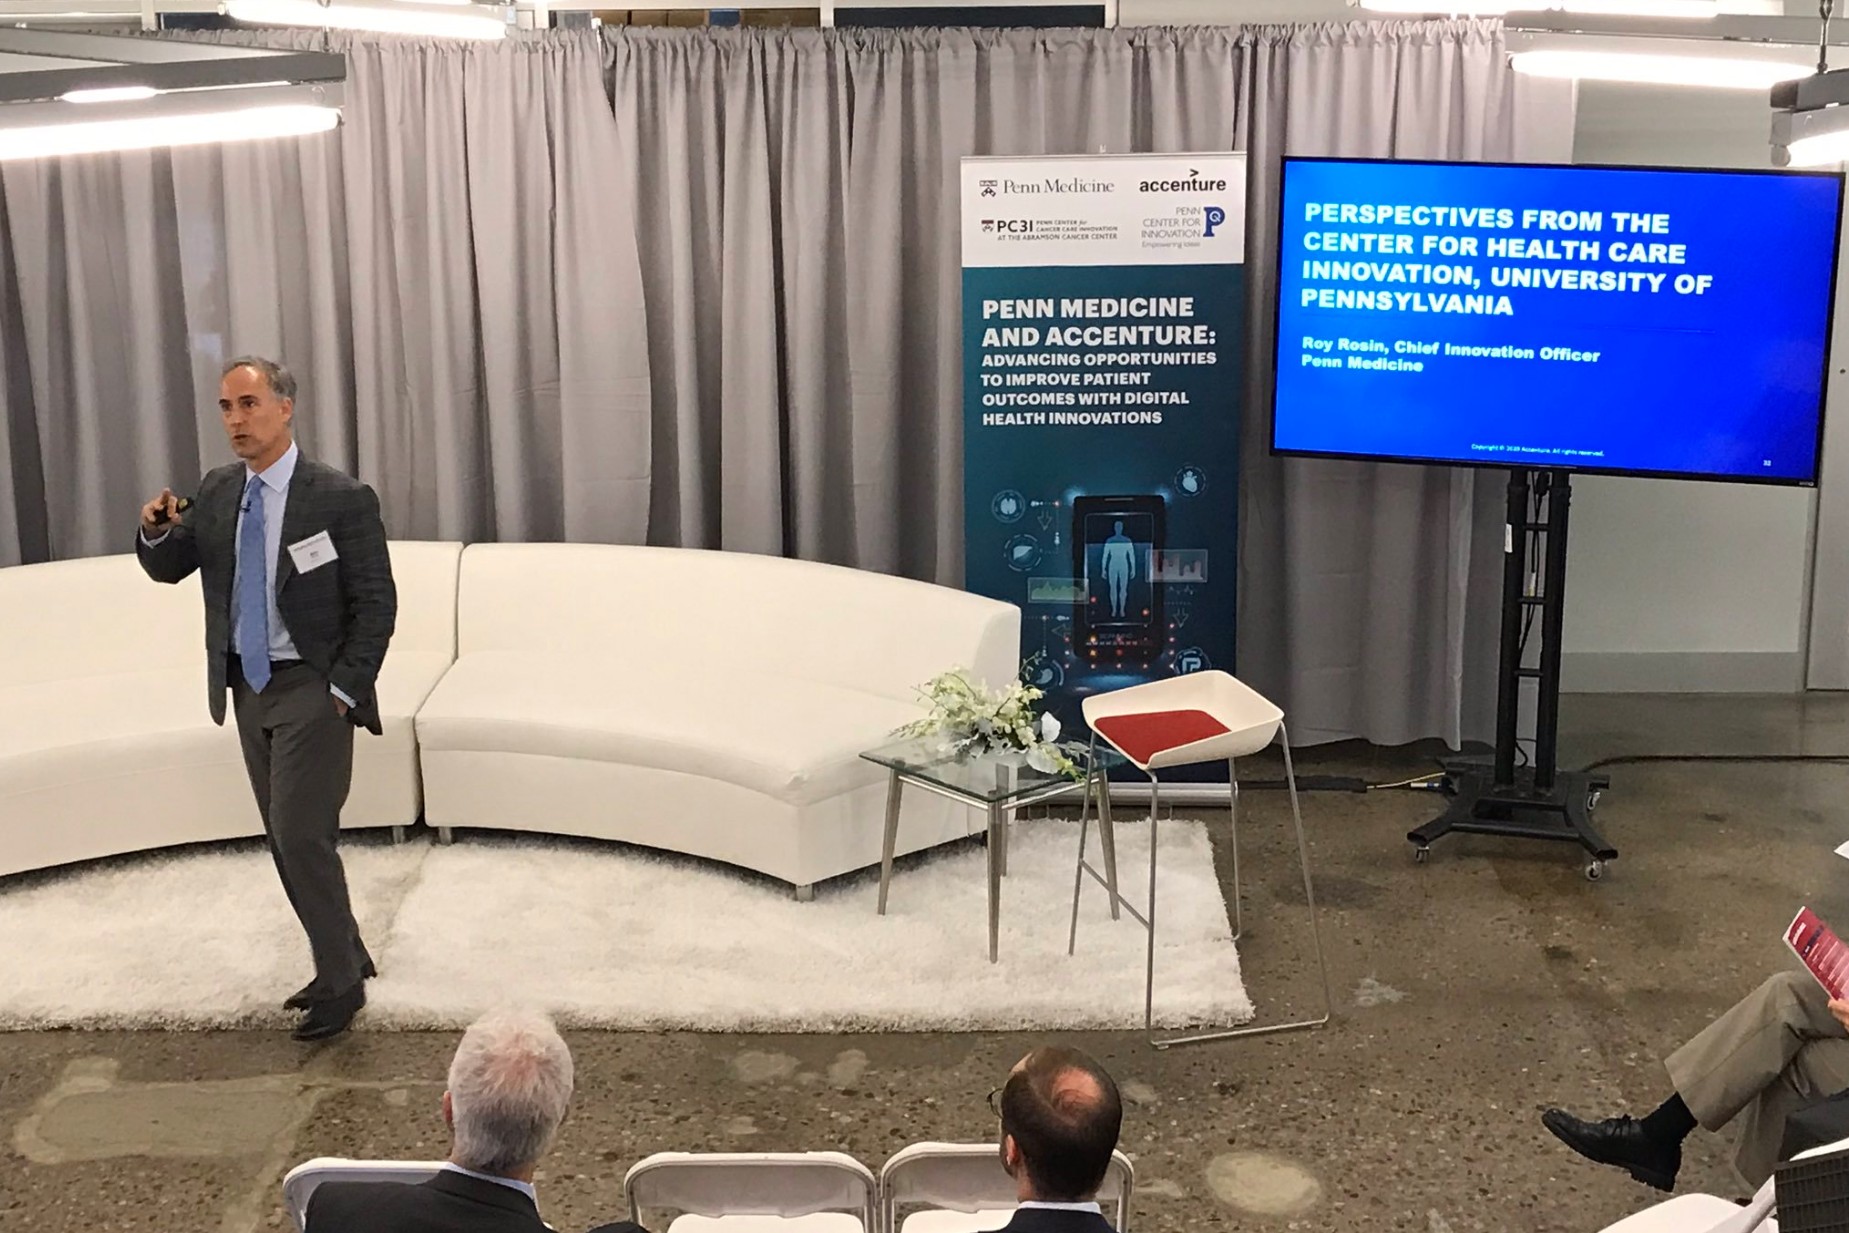 a person in front of a white couch and gray curtains and a TV screen that says perspectives from the center for health care innovation, university of pennsylvania giving a presentation to an audience